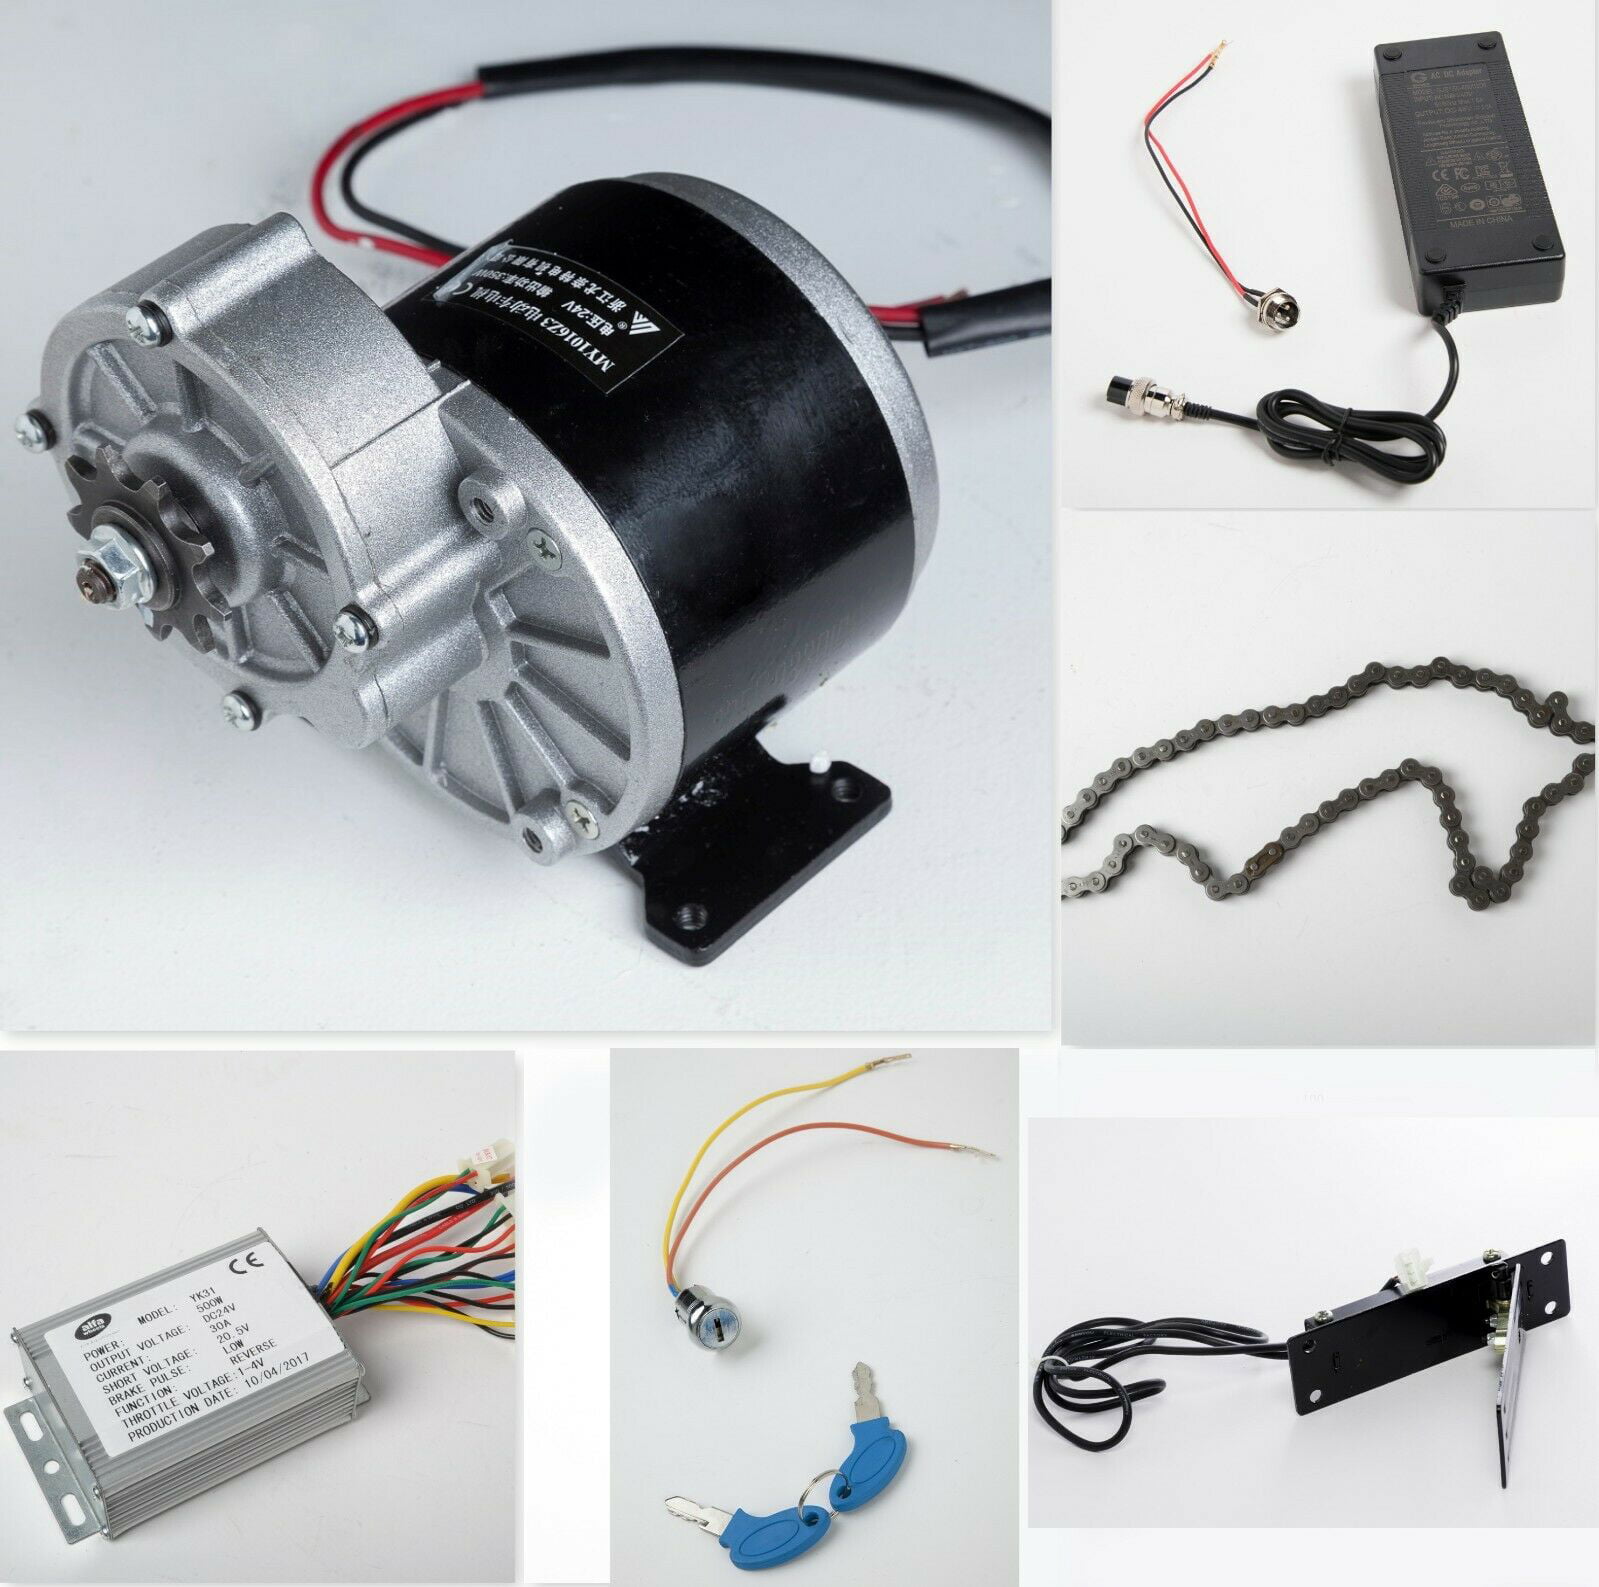 24V 350W Electric Motor Speed Controller Batteries Charger Keylock Throttle Grip 